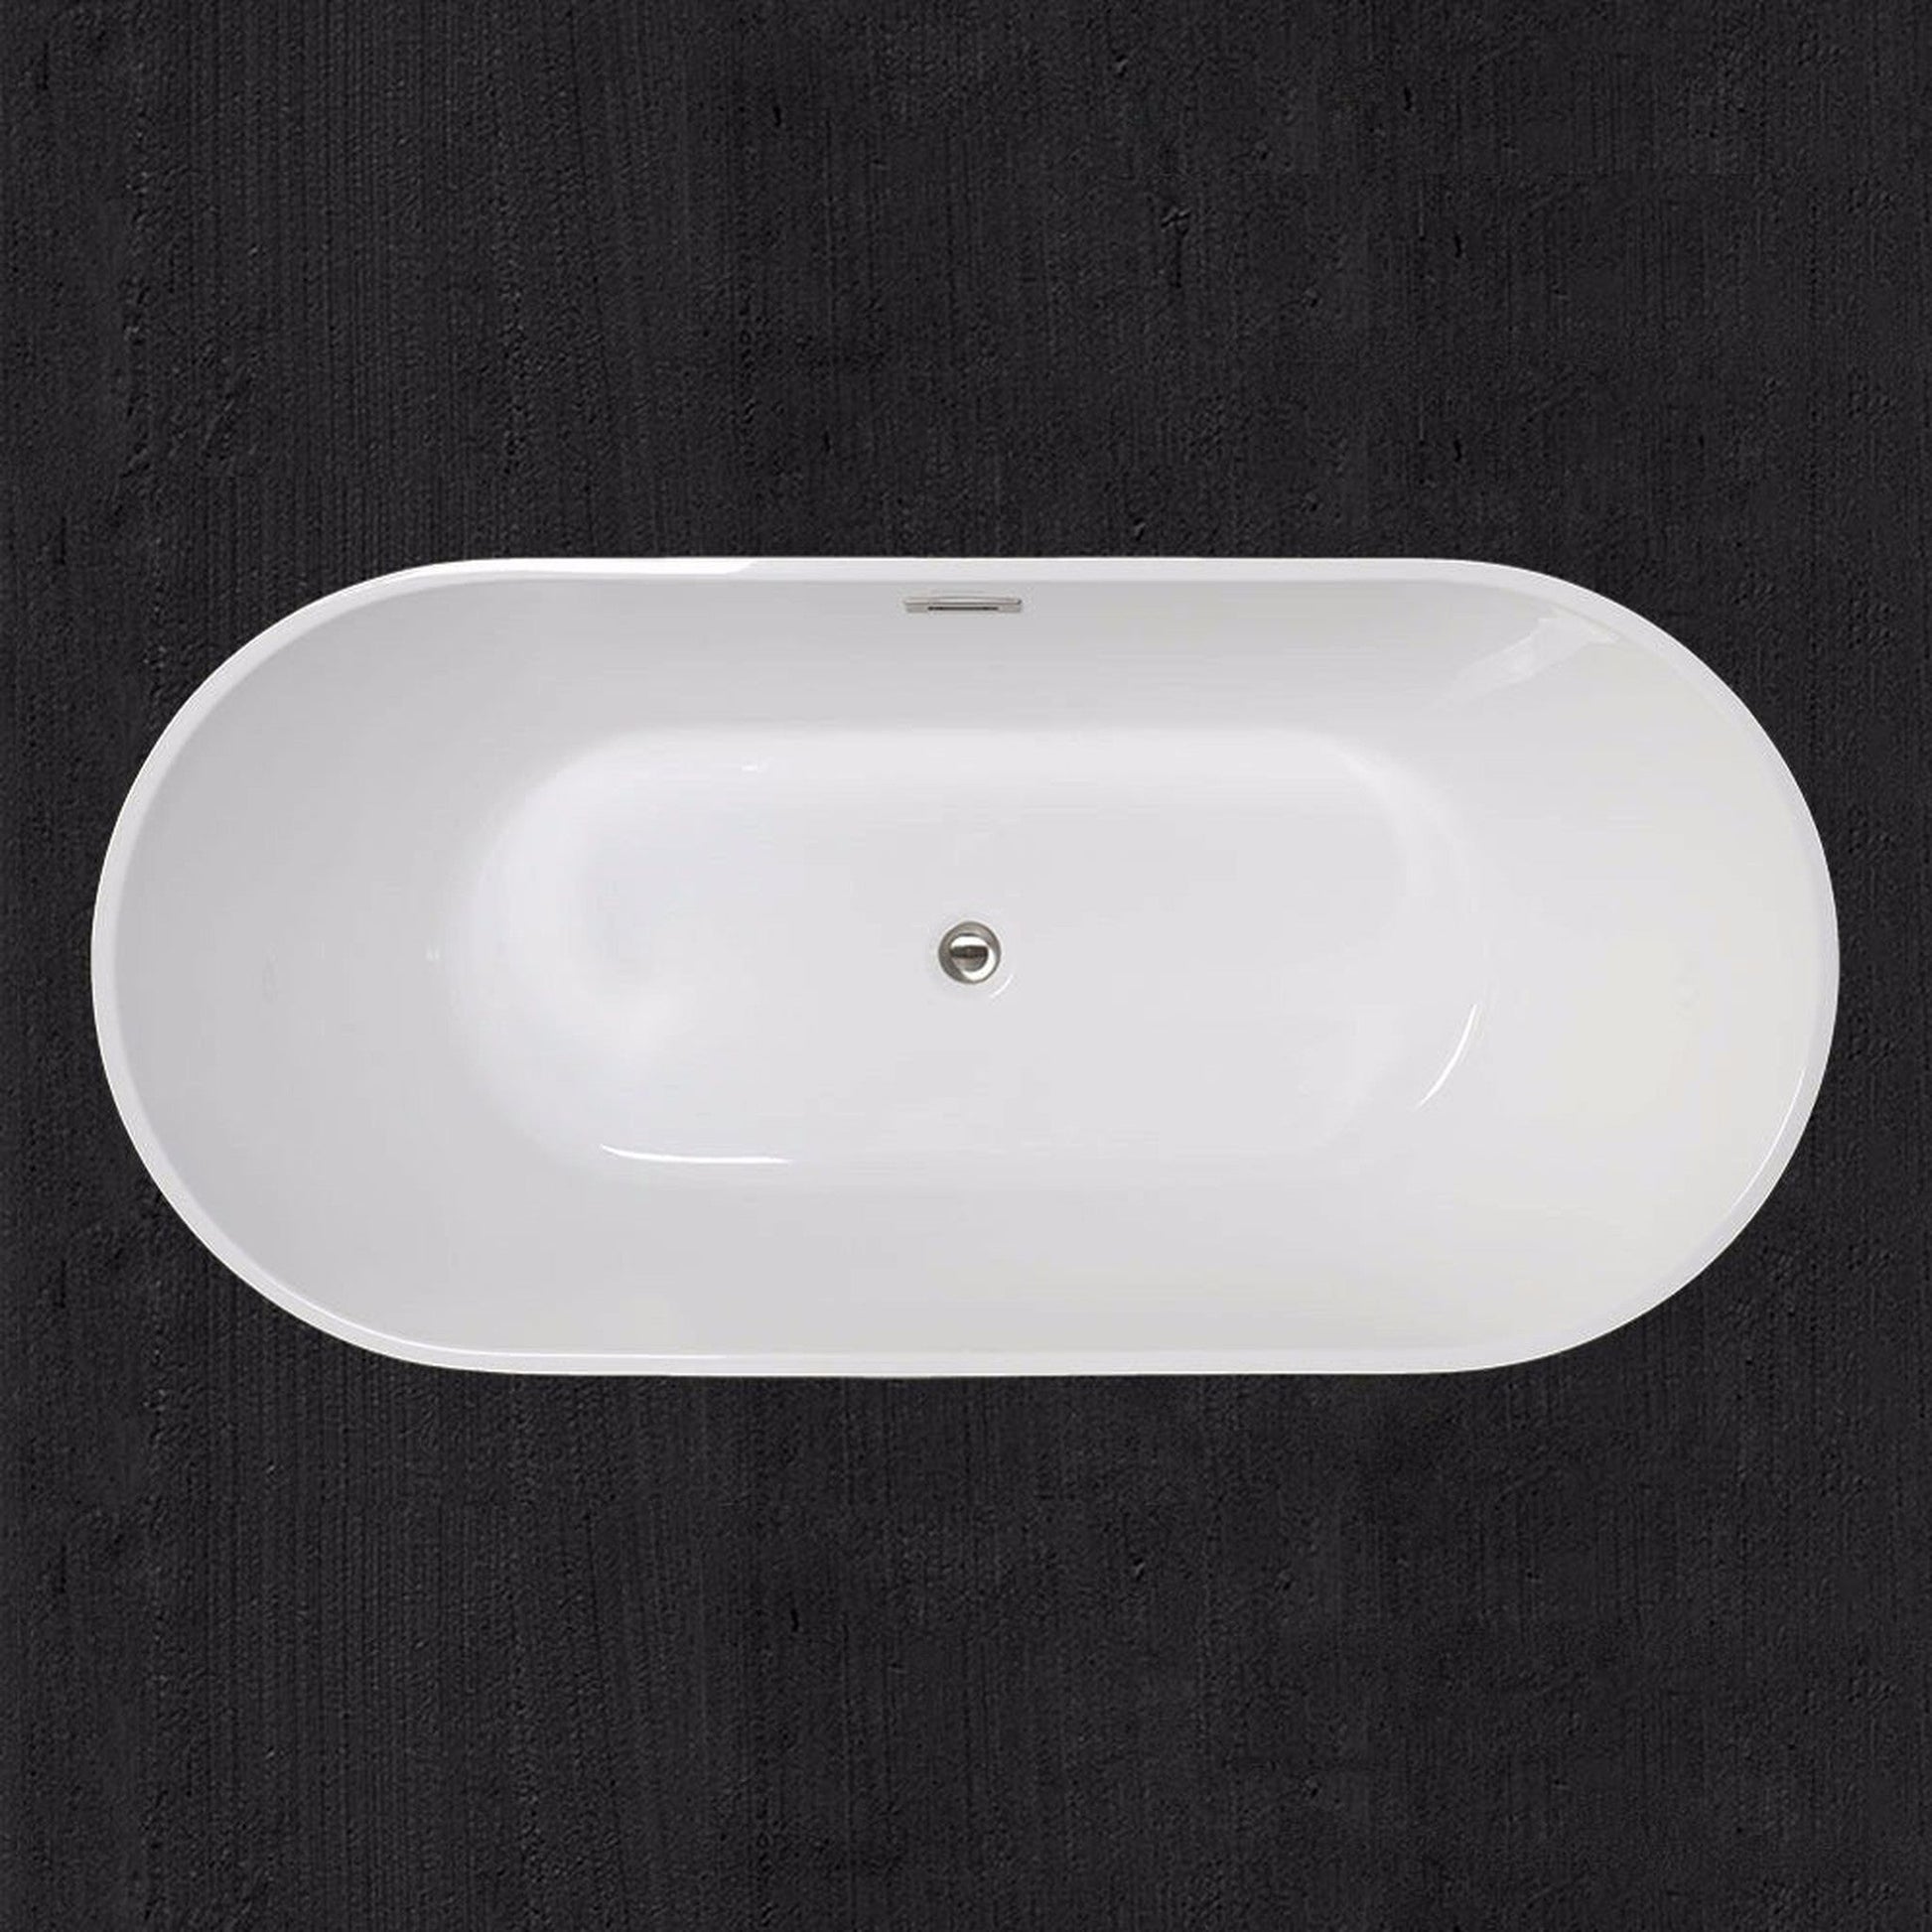 WoodBridge B0014 59" White Acrylic Freestanding Soaking Bathtub With Brushed Nickel Drain, Overflow, F0023BNVT Tub Filler and Caddy Tray